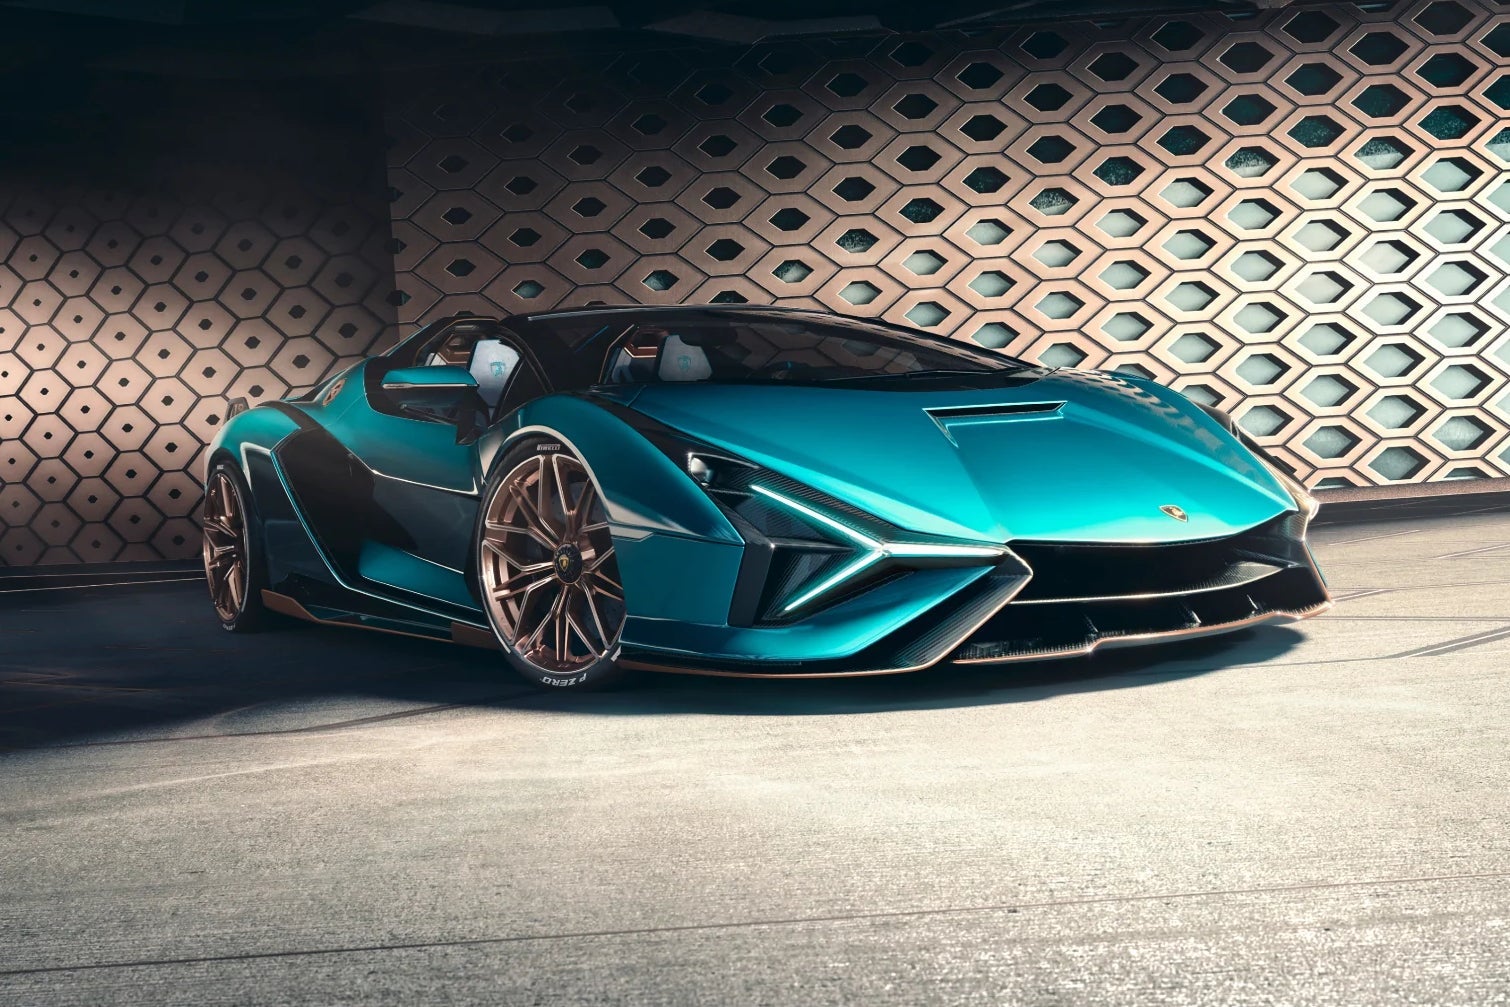 The 25 Most Expensive Cars in the World